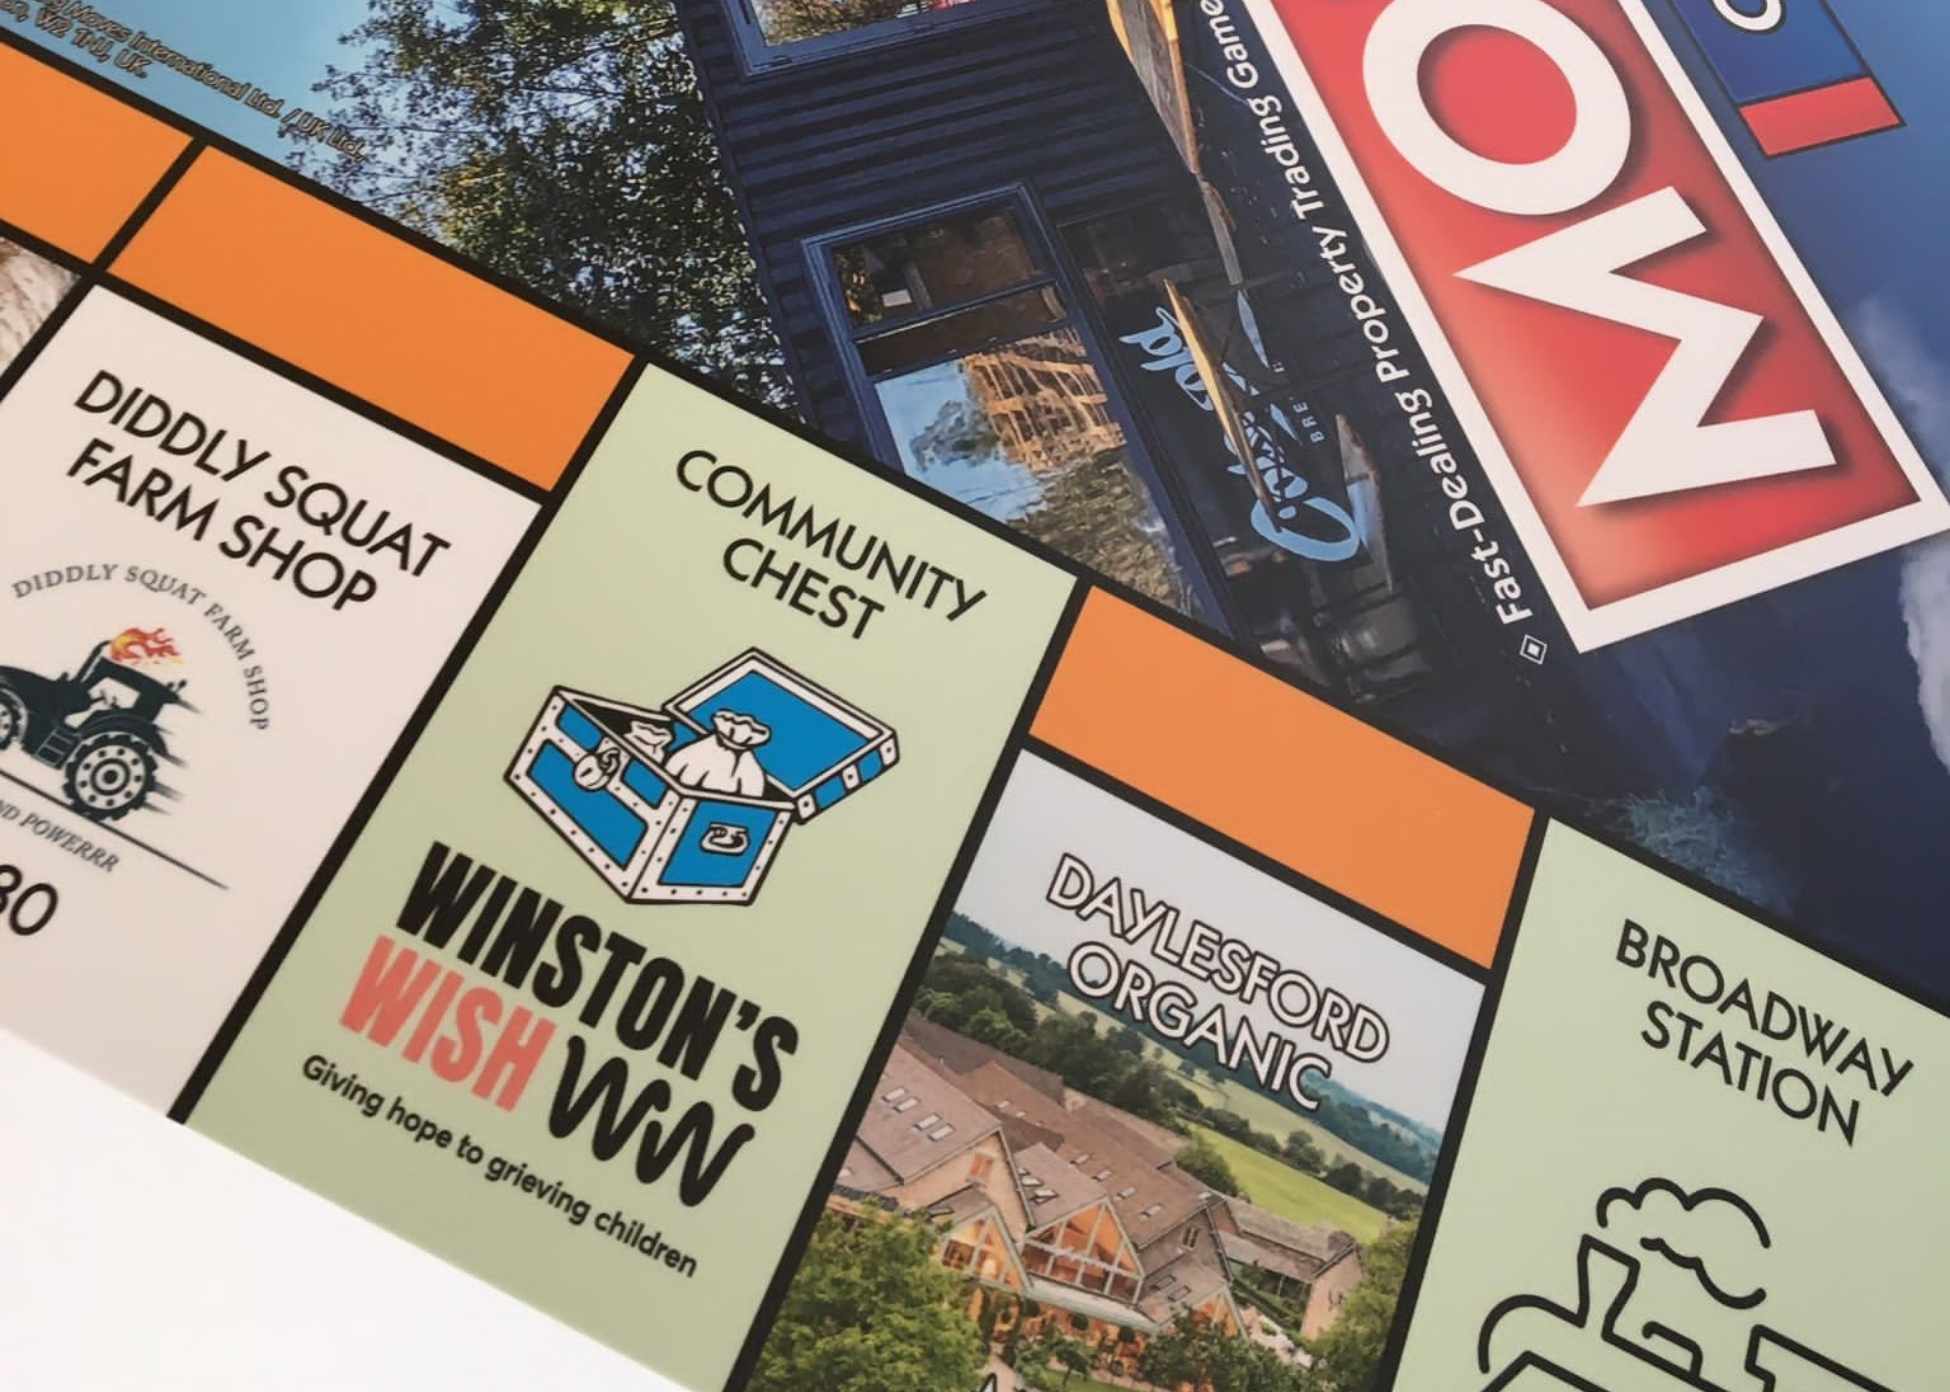 Winston's Wish square on the Cotswolds Monopoly board